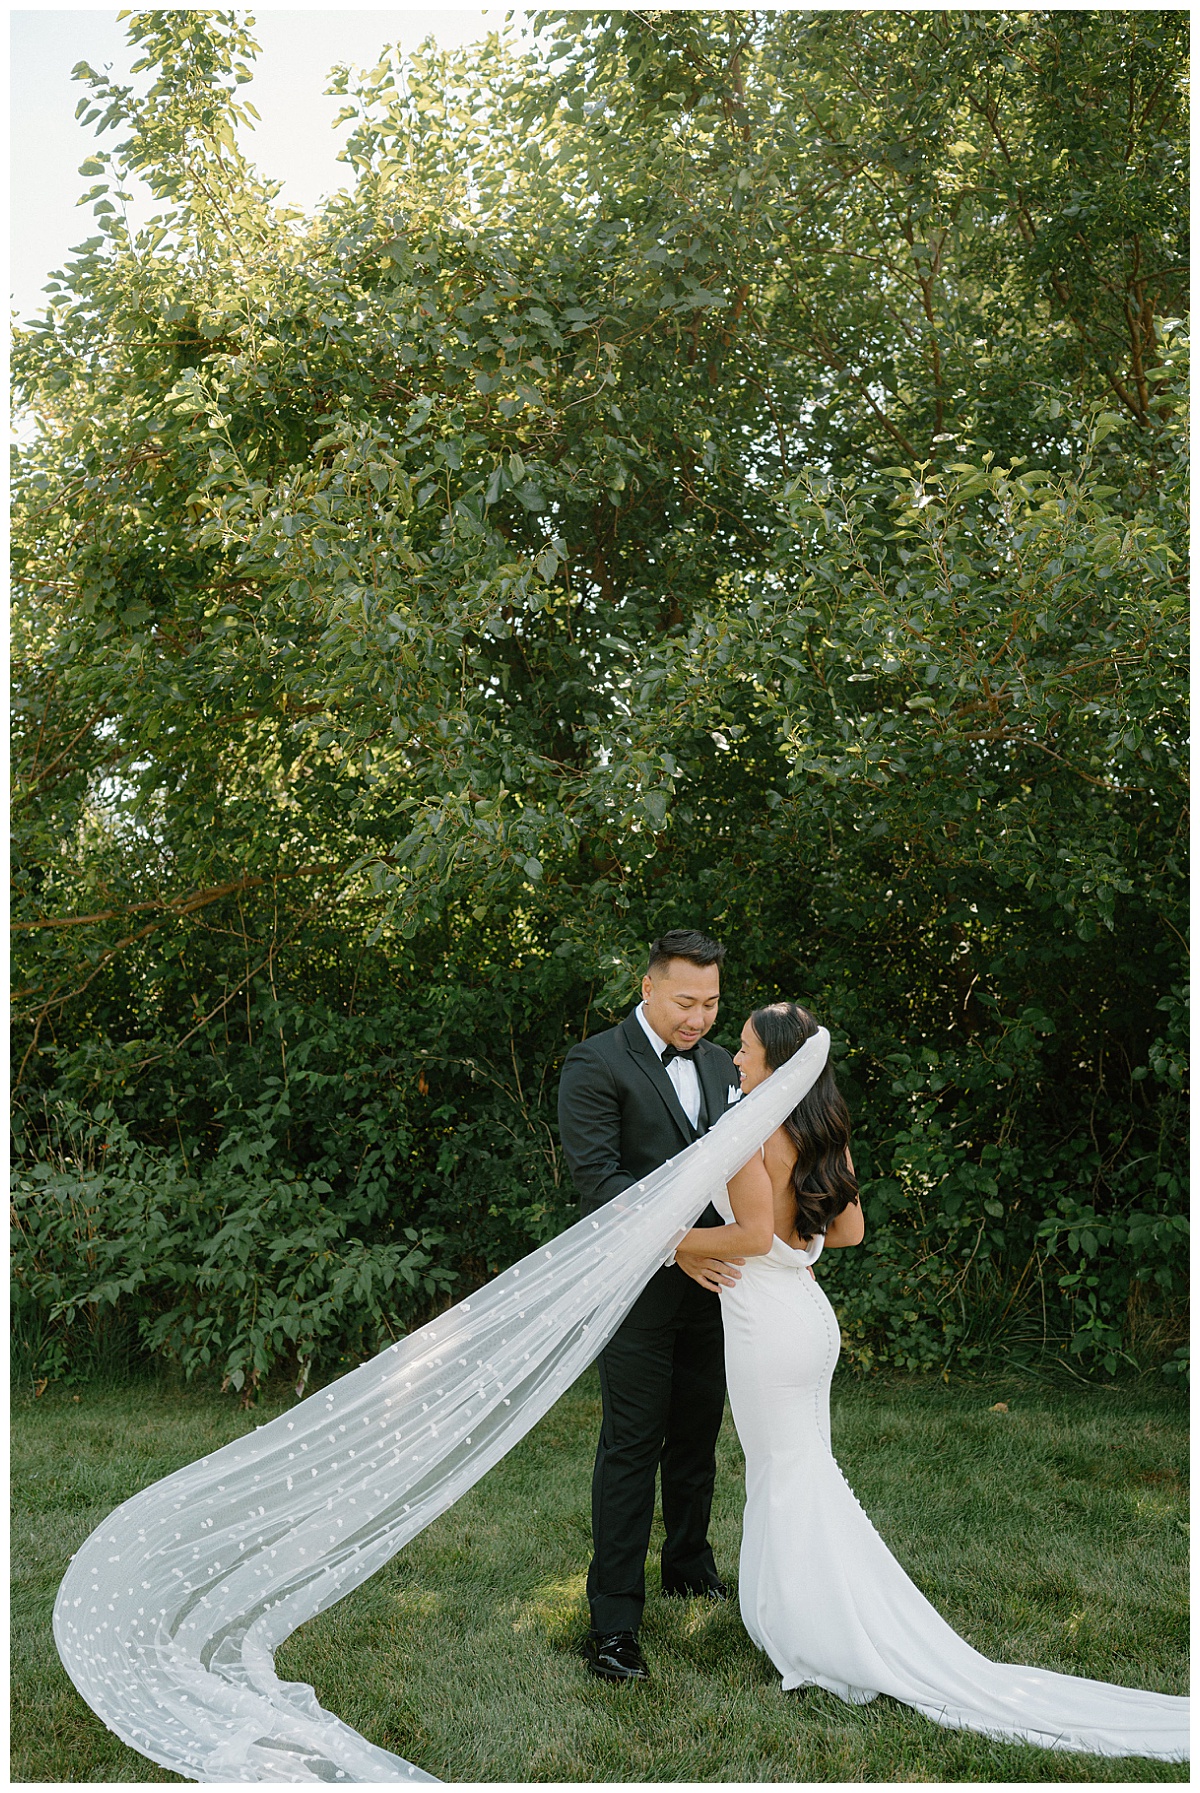 bride's veil blows dramatically in the wind as she stands with groom by Indigo Lace Collective